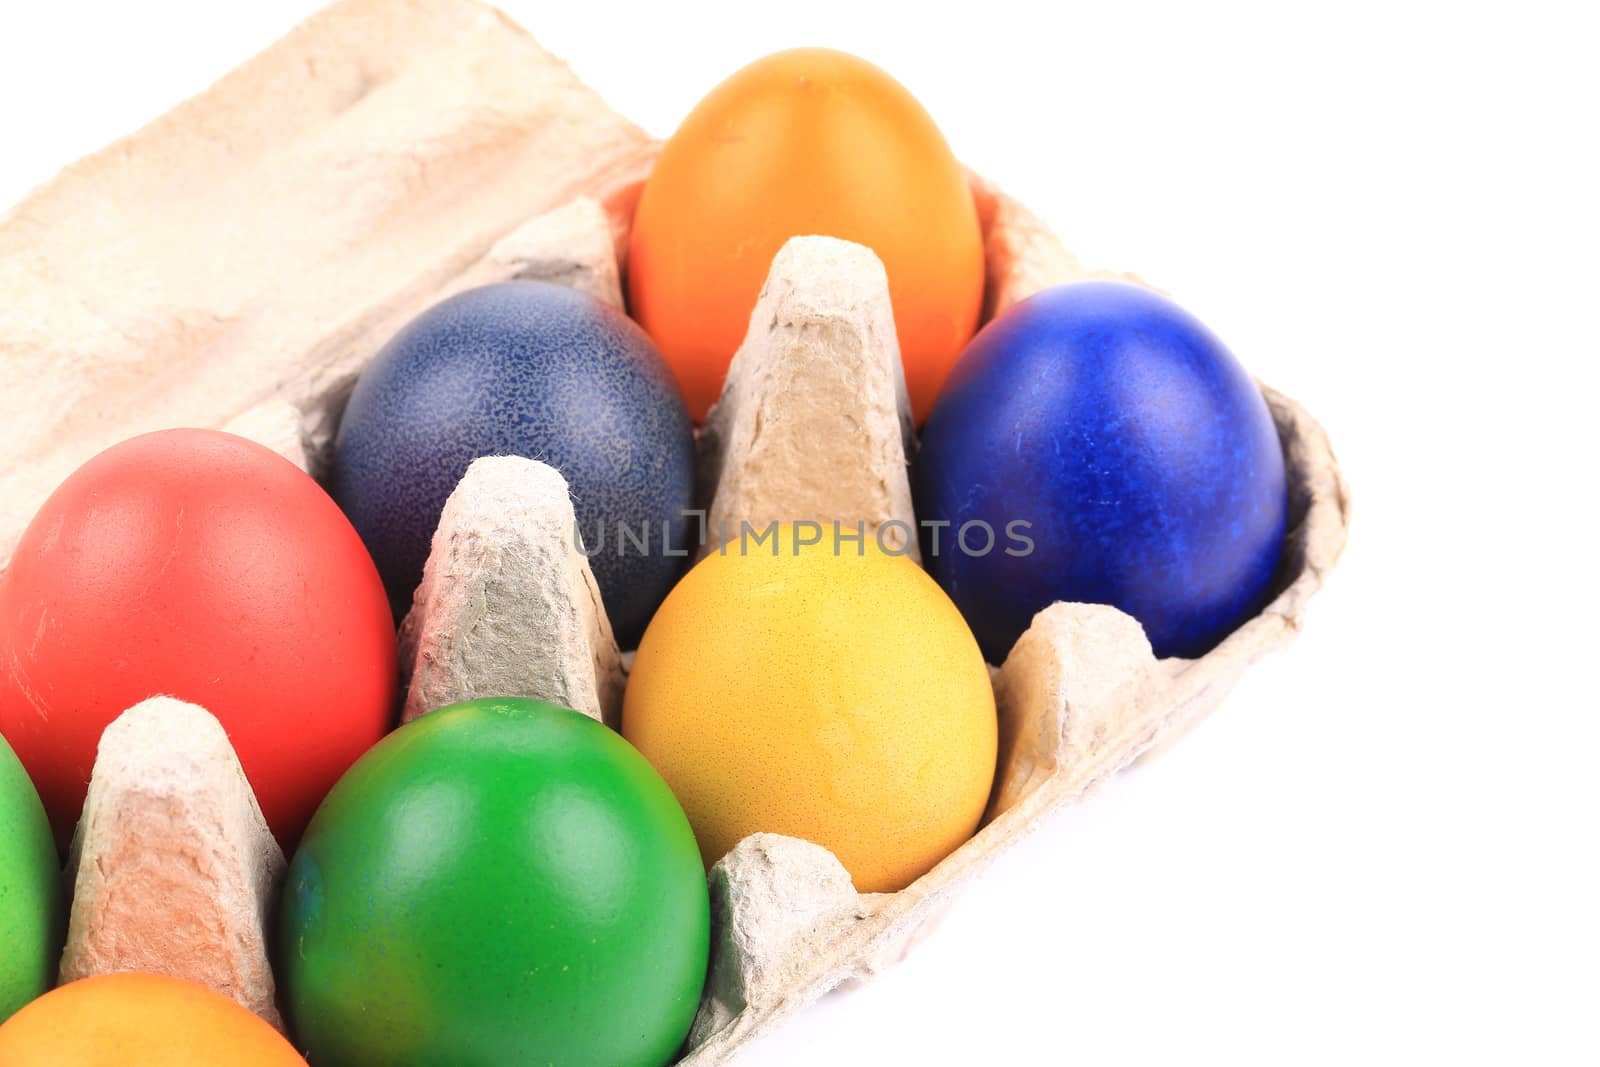 Cardboard box with Easter colored eggs. Whole background.